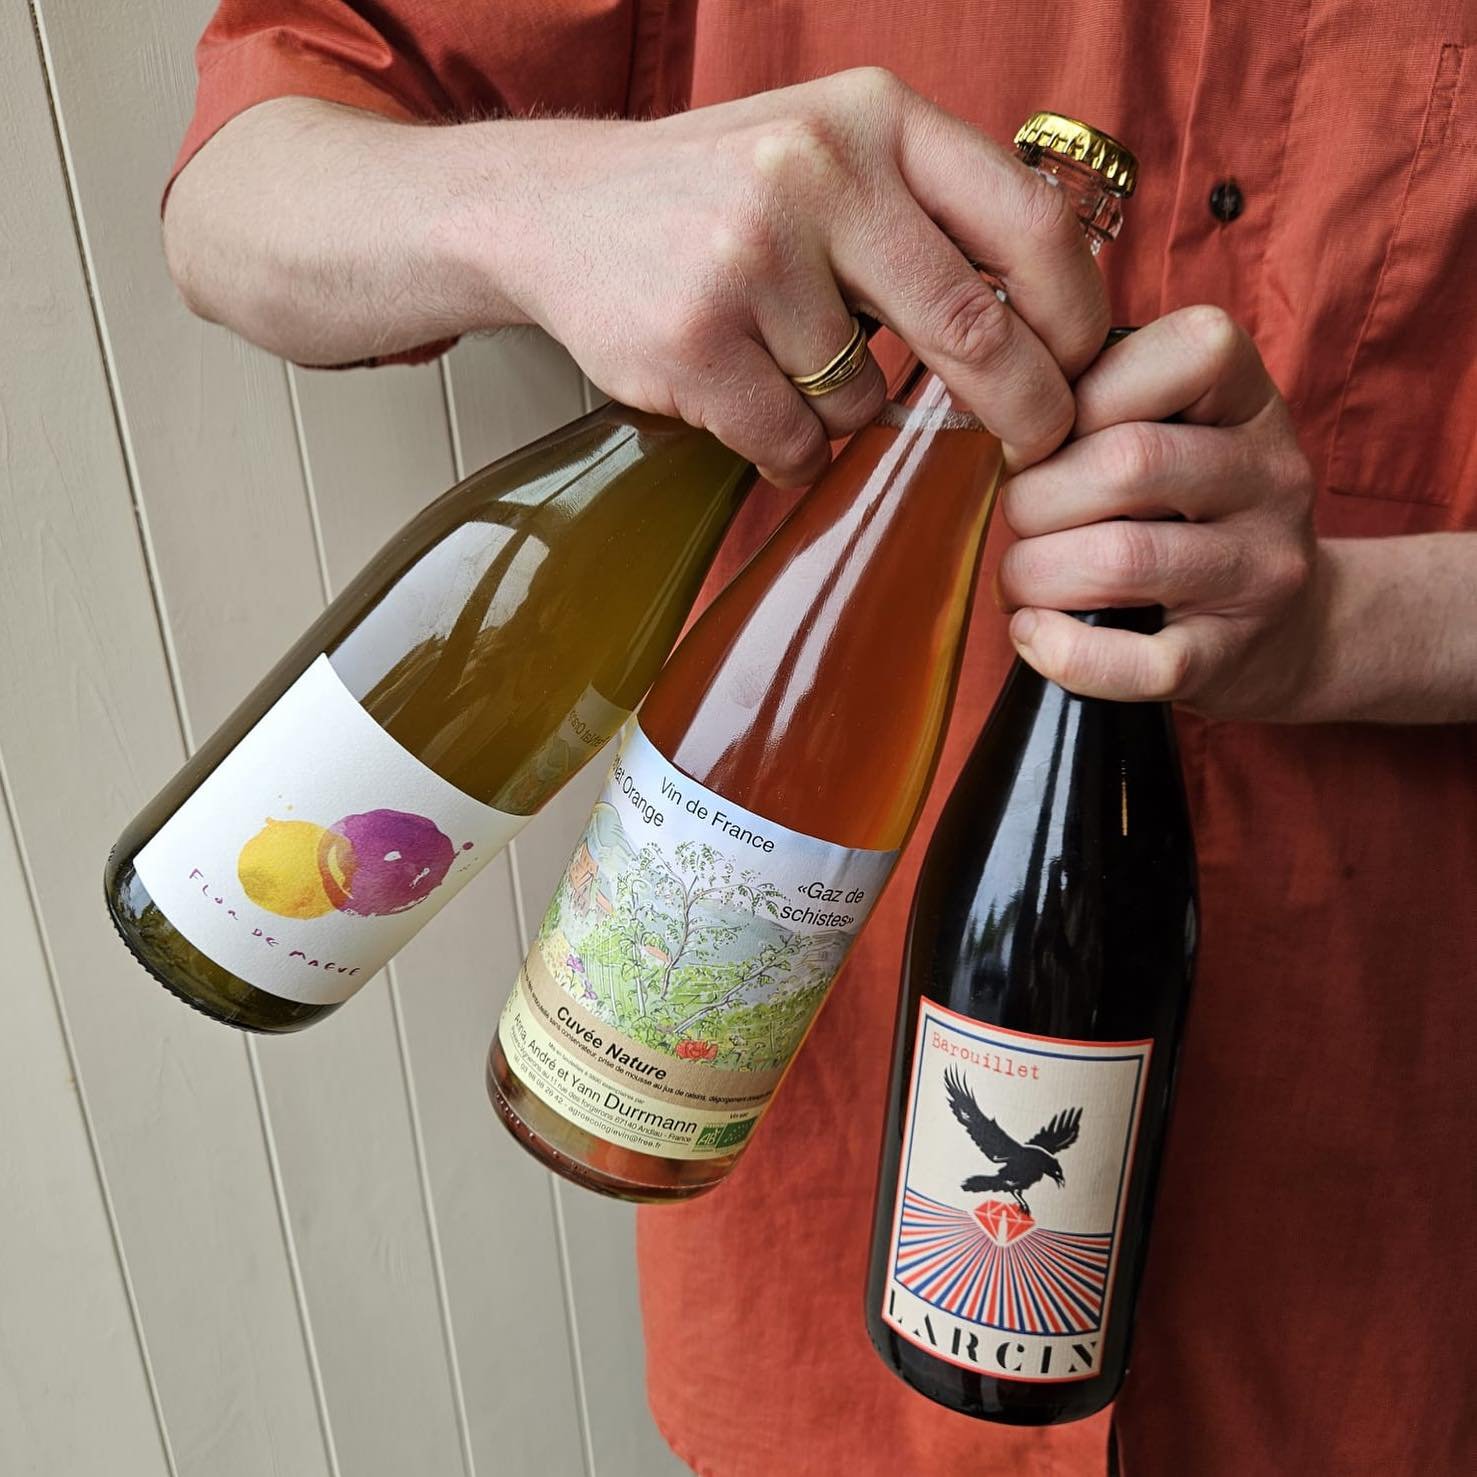 New WINES! Come grab a bottle or two today and celebrate the bank holiday! 
1- Flor de Maeve is a very special skin contact Xarel-lo by the talented @lucychilverswine great fruitiness, zesty, with a saline finish, hints of Mediterranean herbs.

2- Or